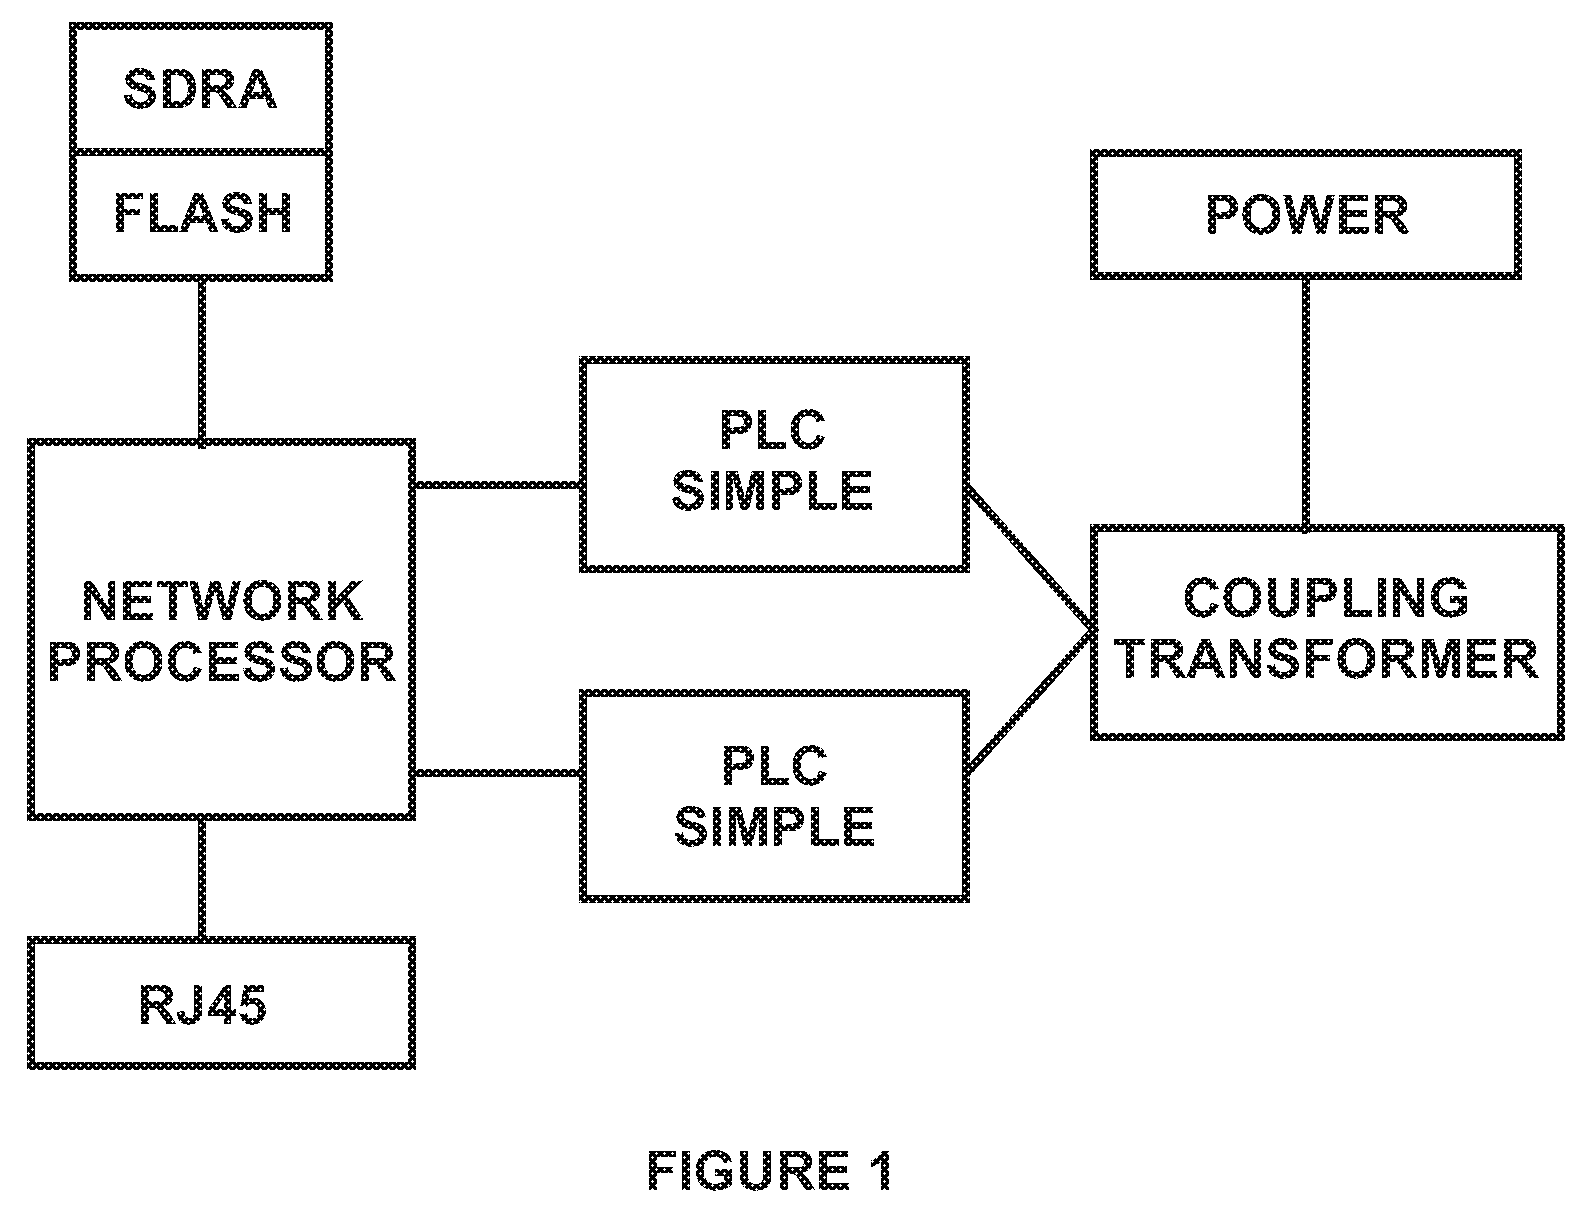 System and Method for Repeater in a Power Line Network